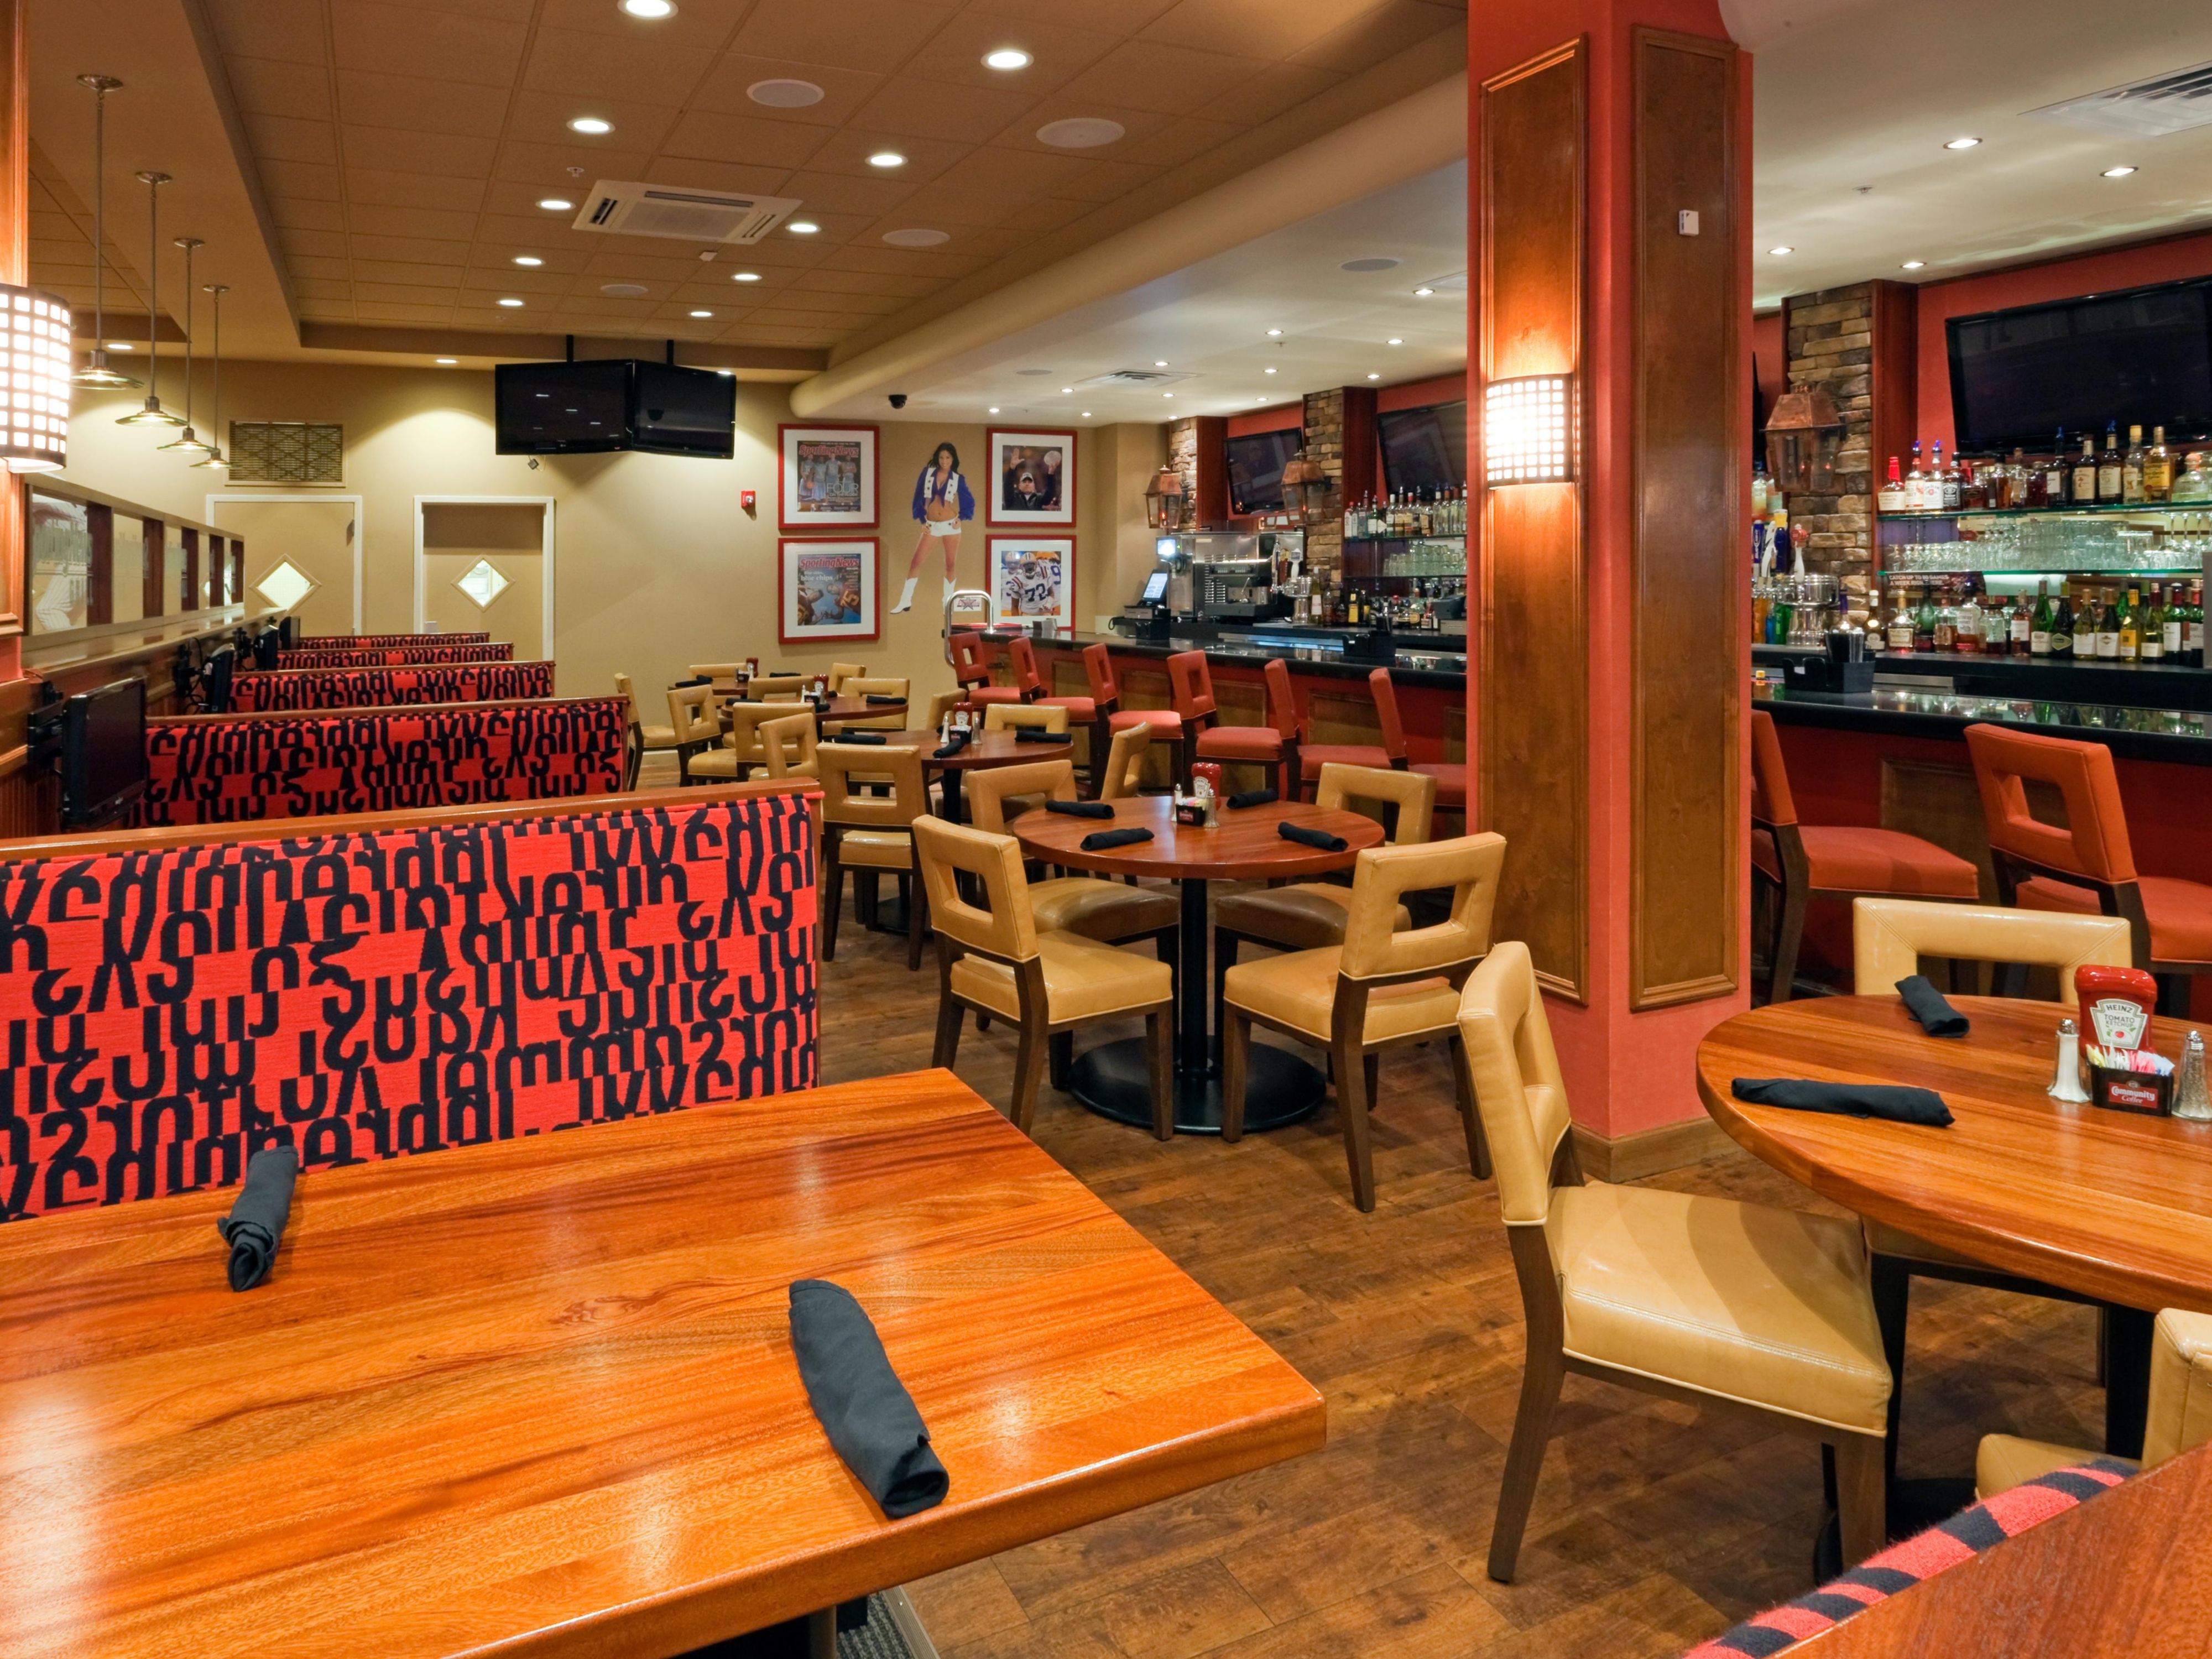 Get in the zone at the Holiday Inn!  The Sport Zone, a pub and grill connected to the hotel, is open for breakfast and dinner everyday, and for lunch during sporting events.  Surrounded by over 25 flat-screen TVs, you are guaranteed a great seat to cheer on your favorite team while keeping an eye on your rivals.  Indulge in handcrafted cocktails, a